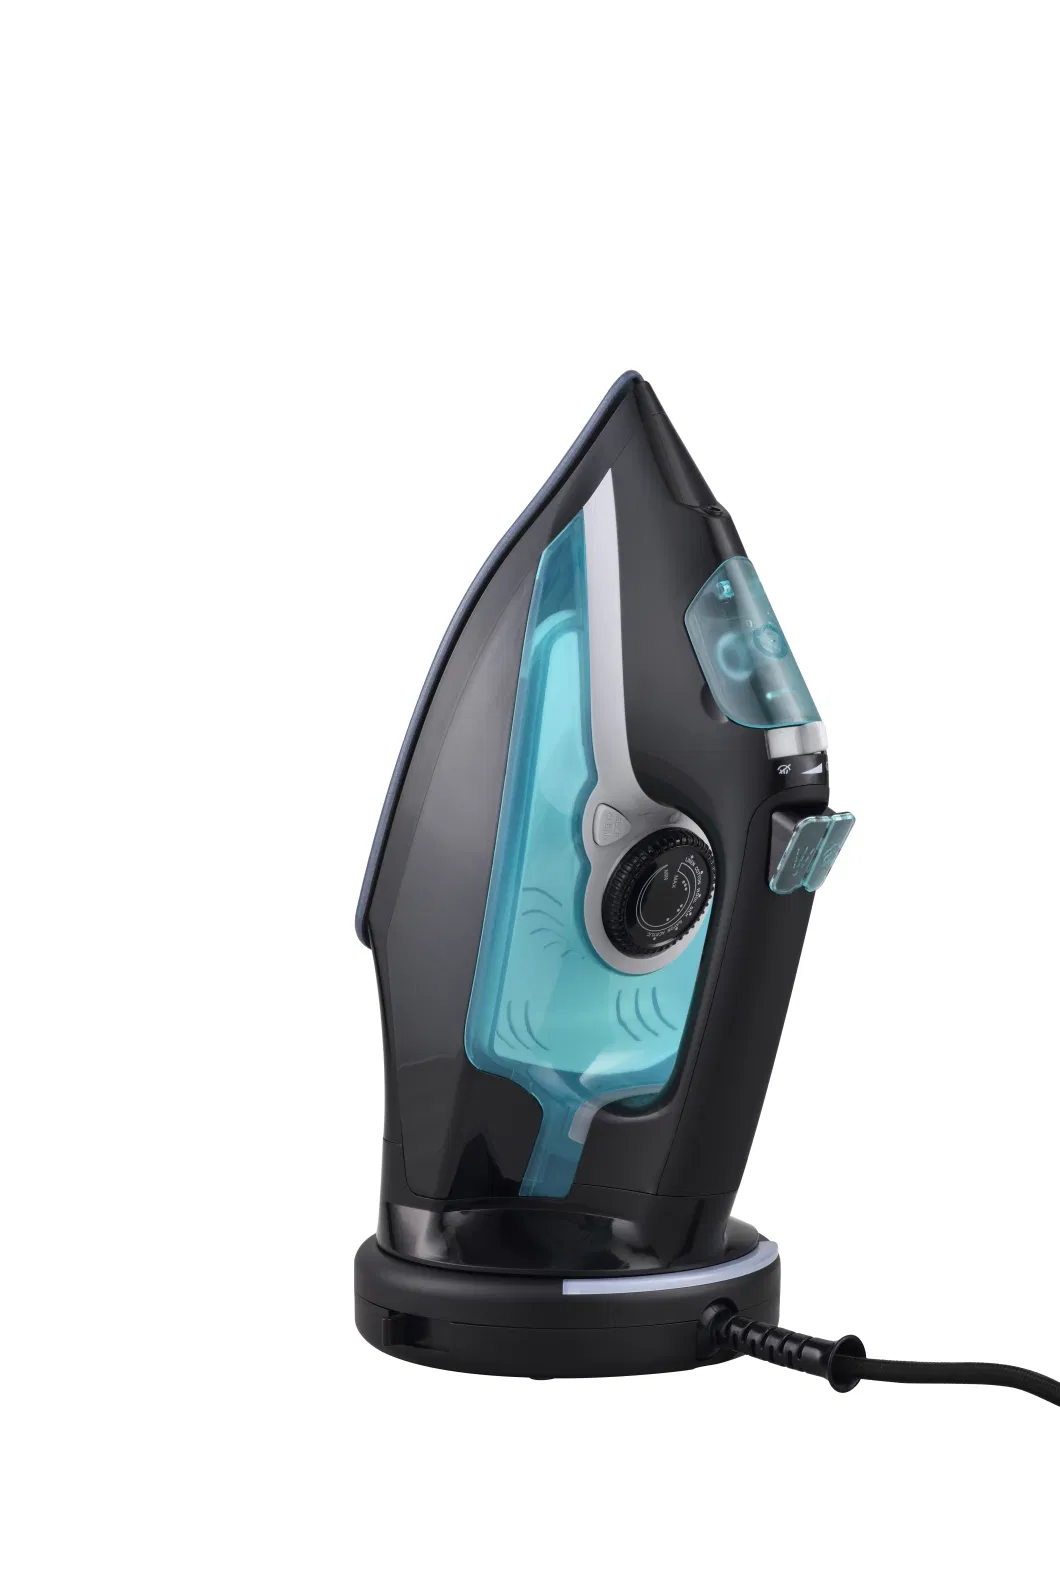 Home Used Cord and Cordless CE Approved Steam Iron